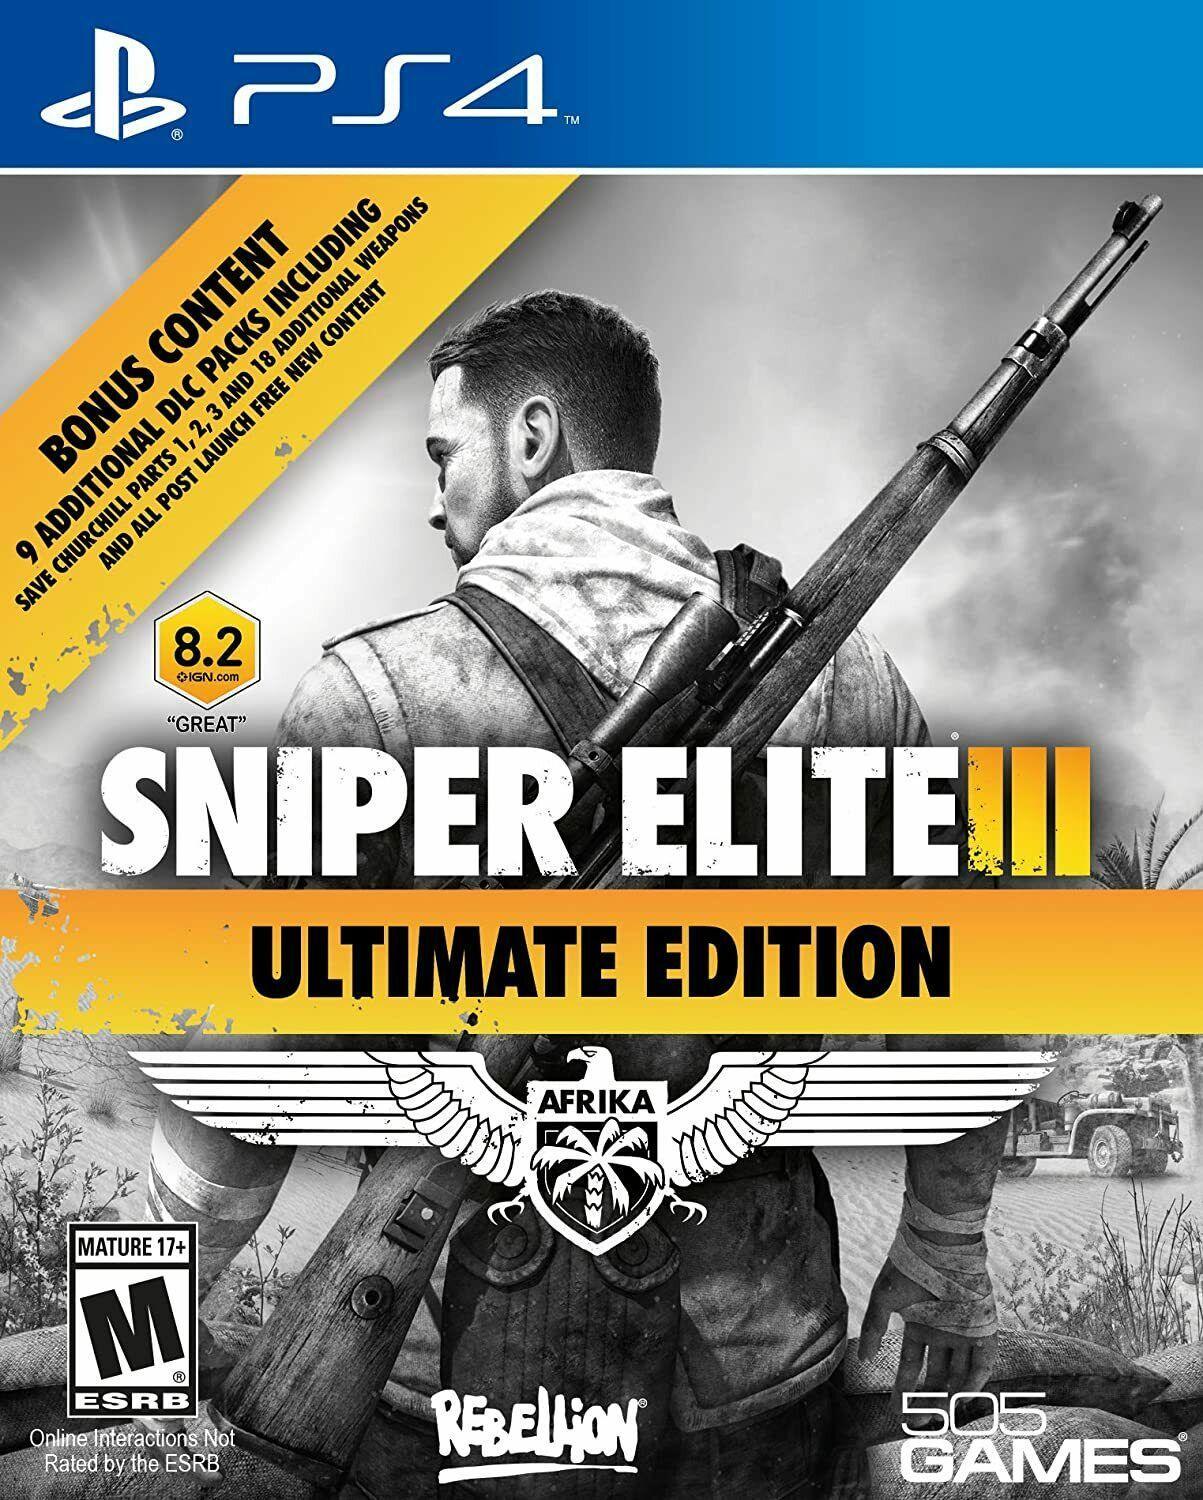 Sniper Elite III Ultimate Edition / PS4 - GD Games 